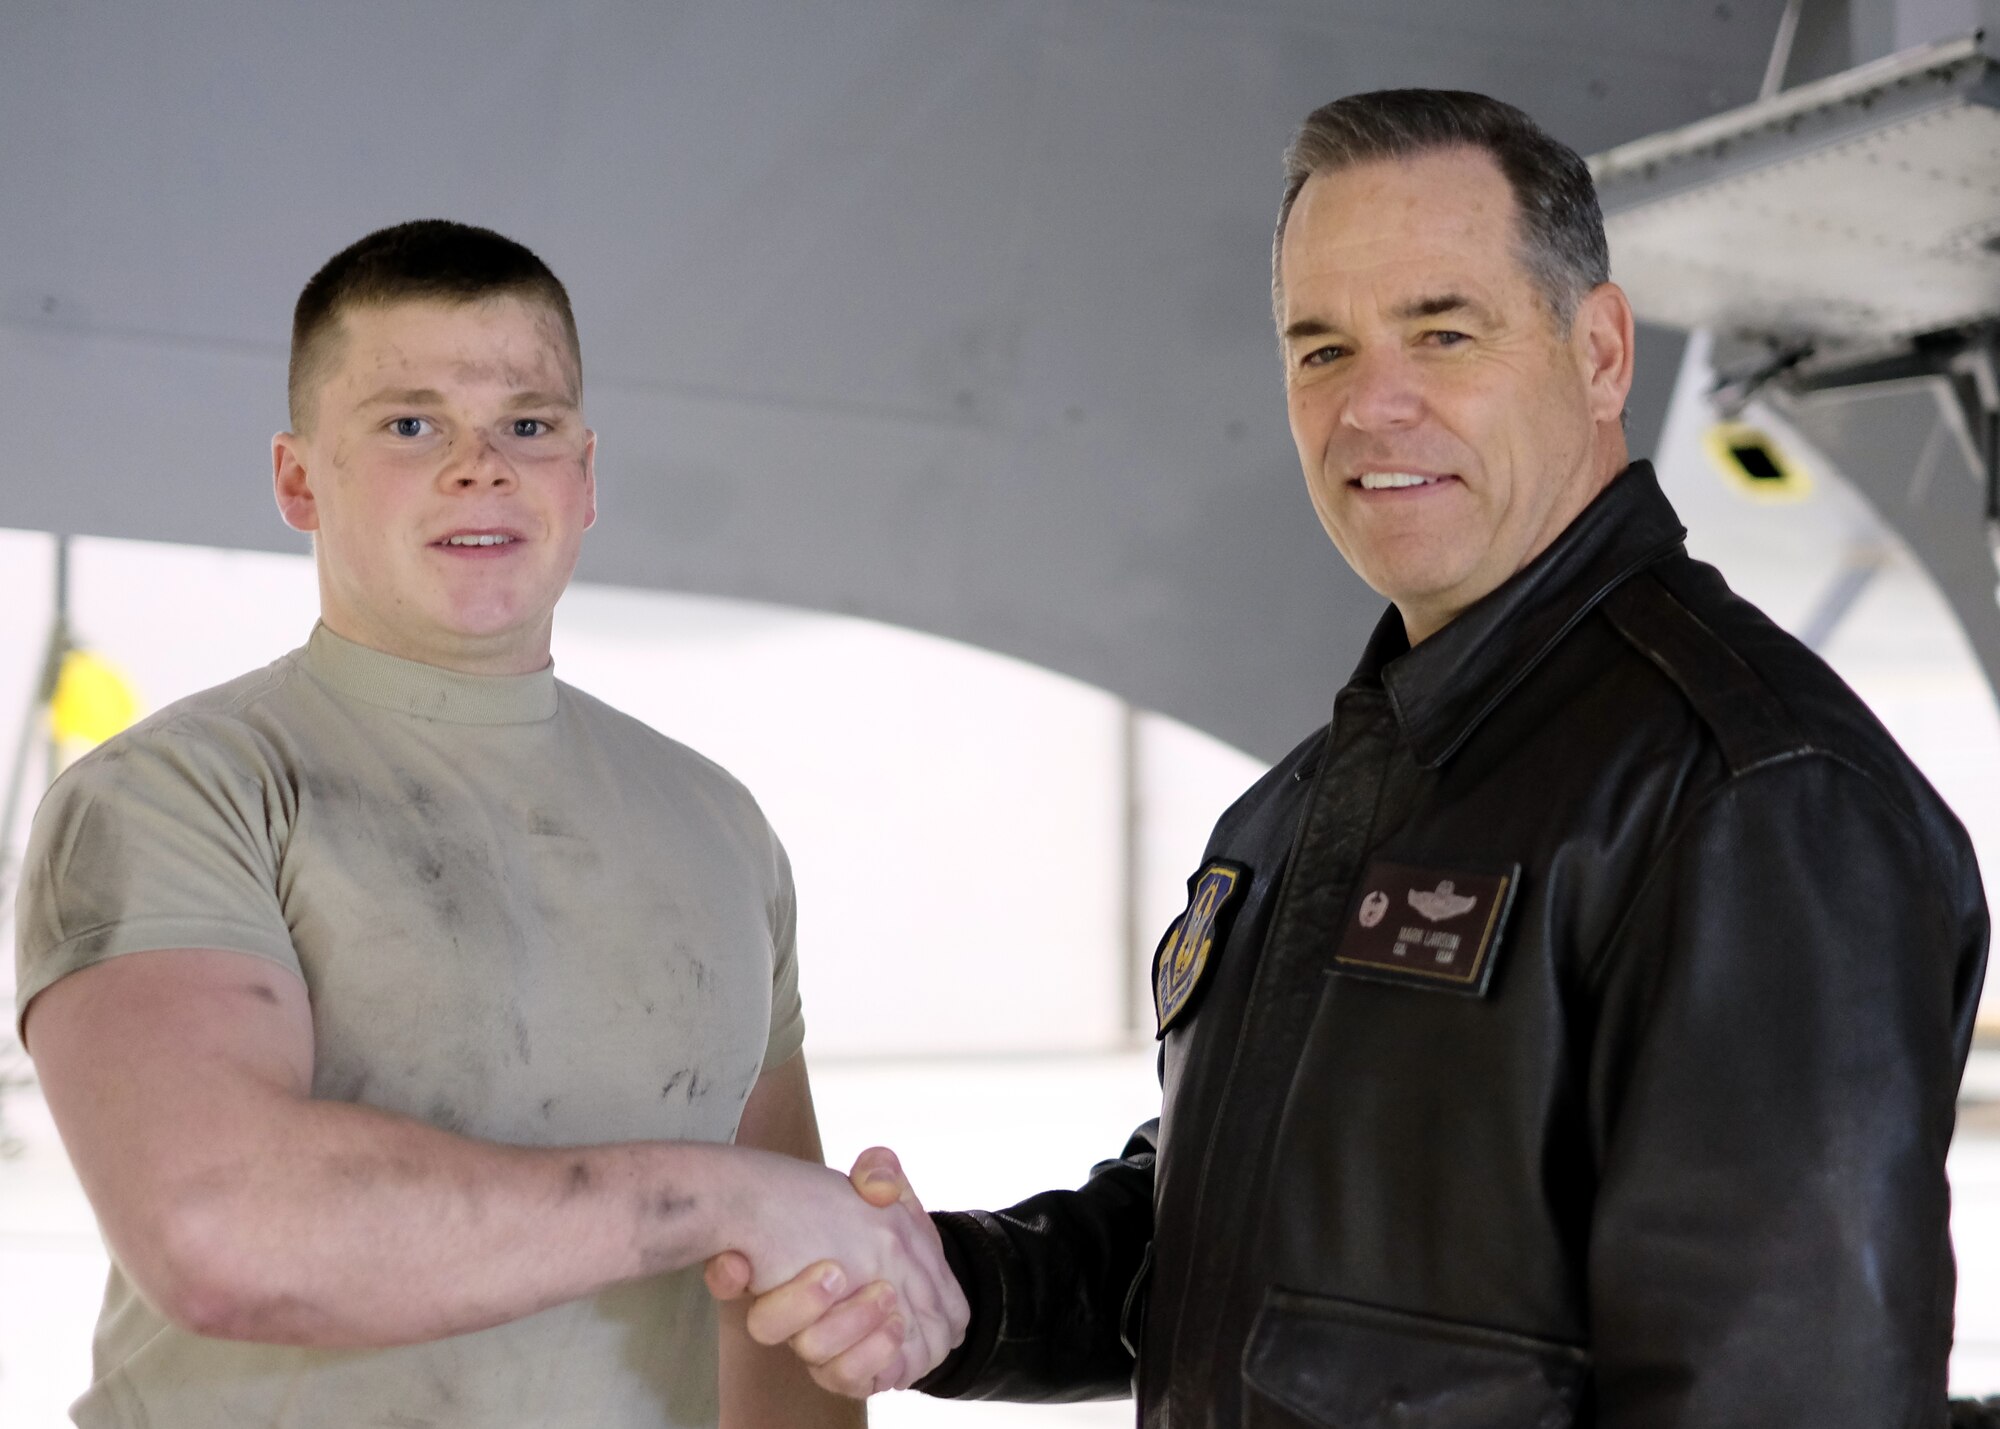 Col. Mark S. Larson, right, 931st Air Refueling Group commander, congratulates Senior Airman Josh Simmons, 931st Maintenance Squadron crew chief, for his performance during a Unit Training Assembly Feb. 7, 2016, at McConnell Air Force Base, Kan. Larson met with the unit to present a coin to Senior Airman Josh Simmons in appreciation of his performance. (U.S. Air Force photo by Senior Airman Preston Webb)